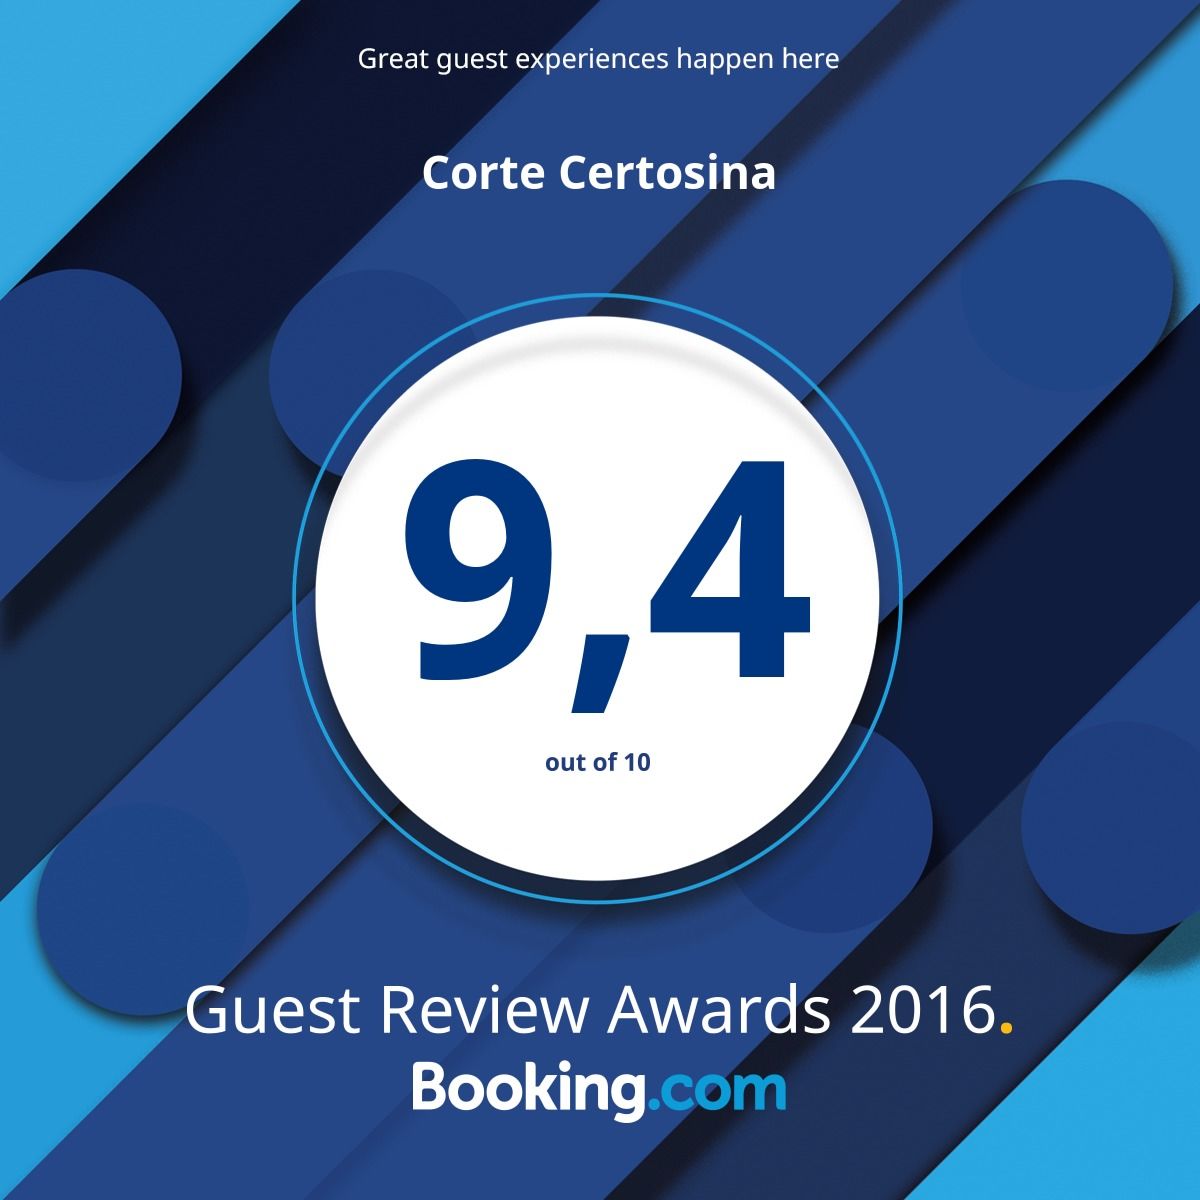 Booking Guest Review Award